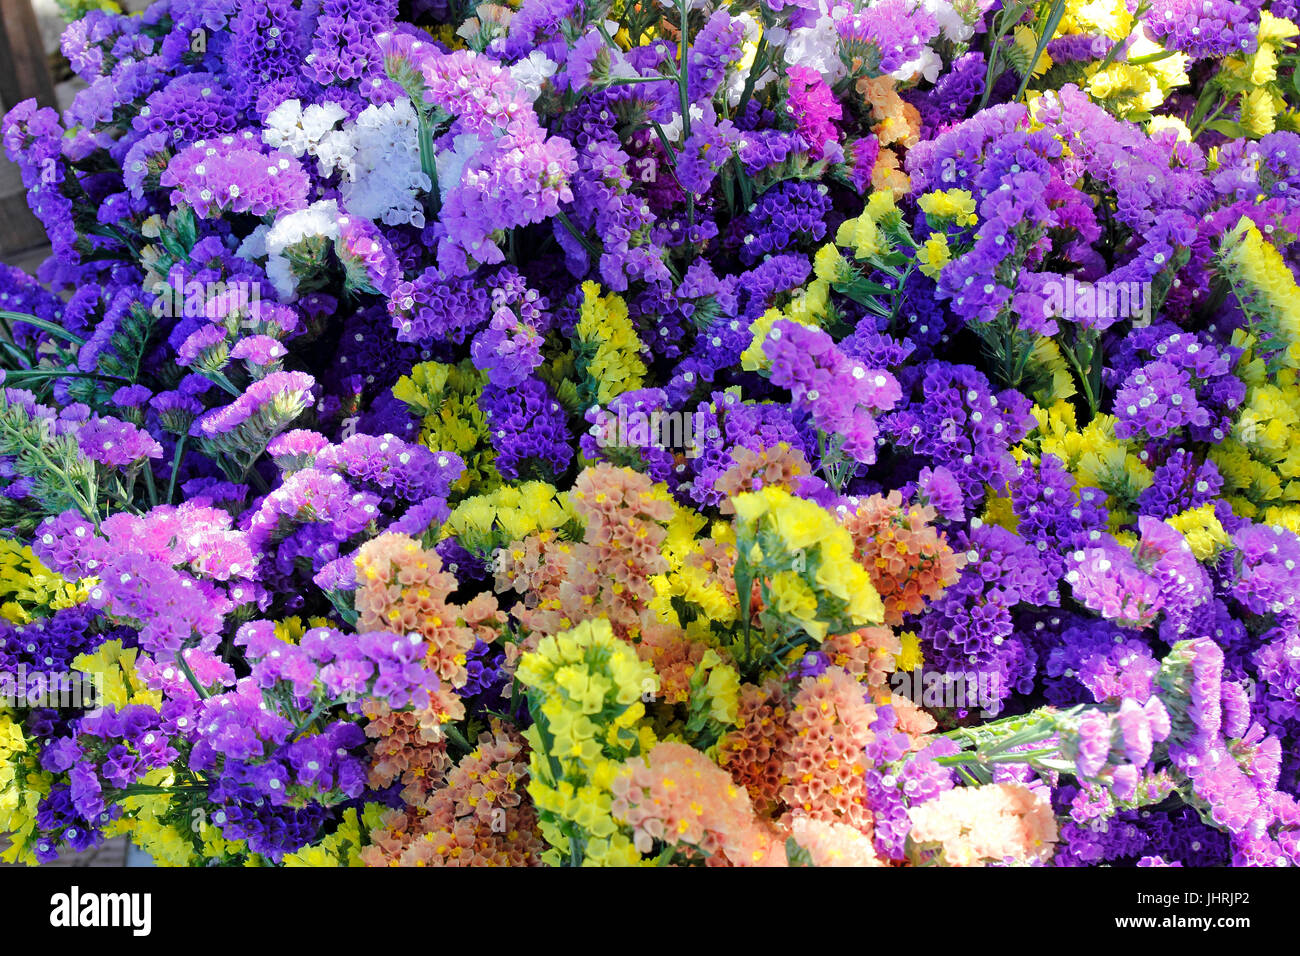 Statice flowers for sale at the Saturday market Colares near Sintra  Portugal Stock Photo - Alamy